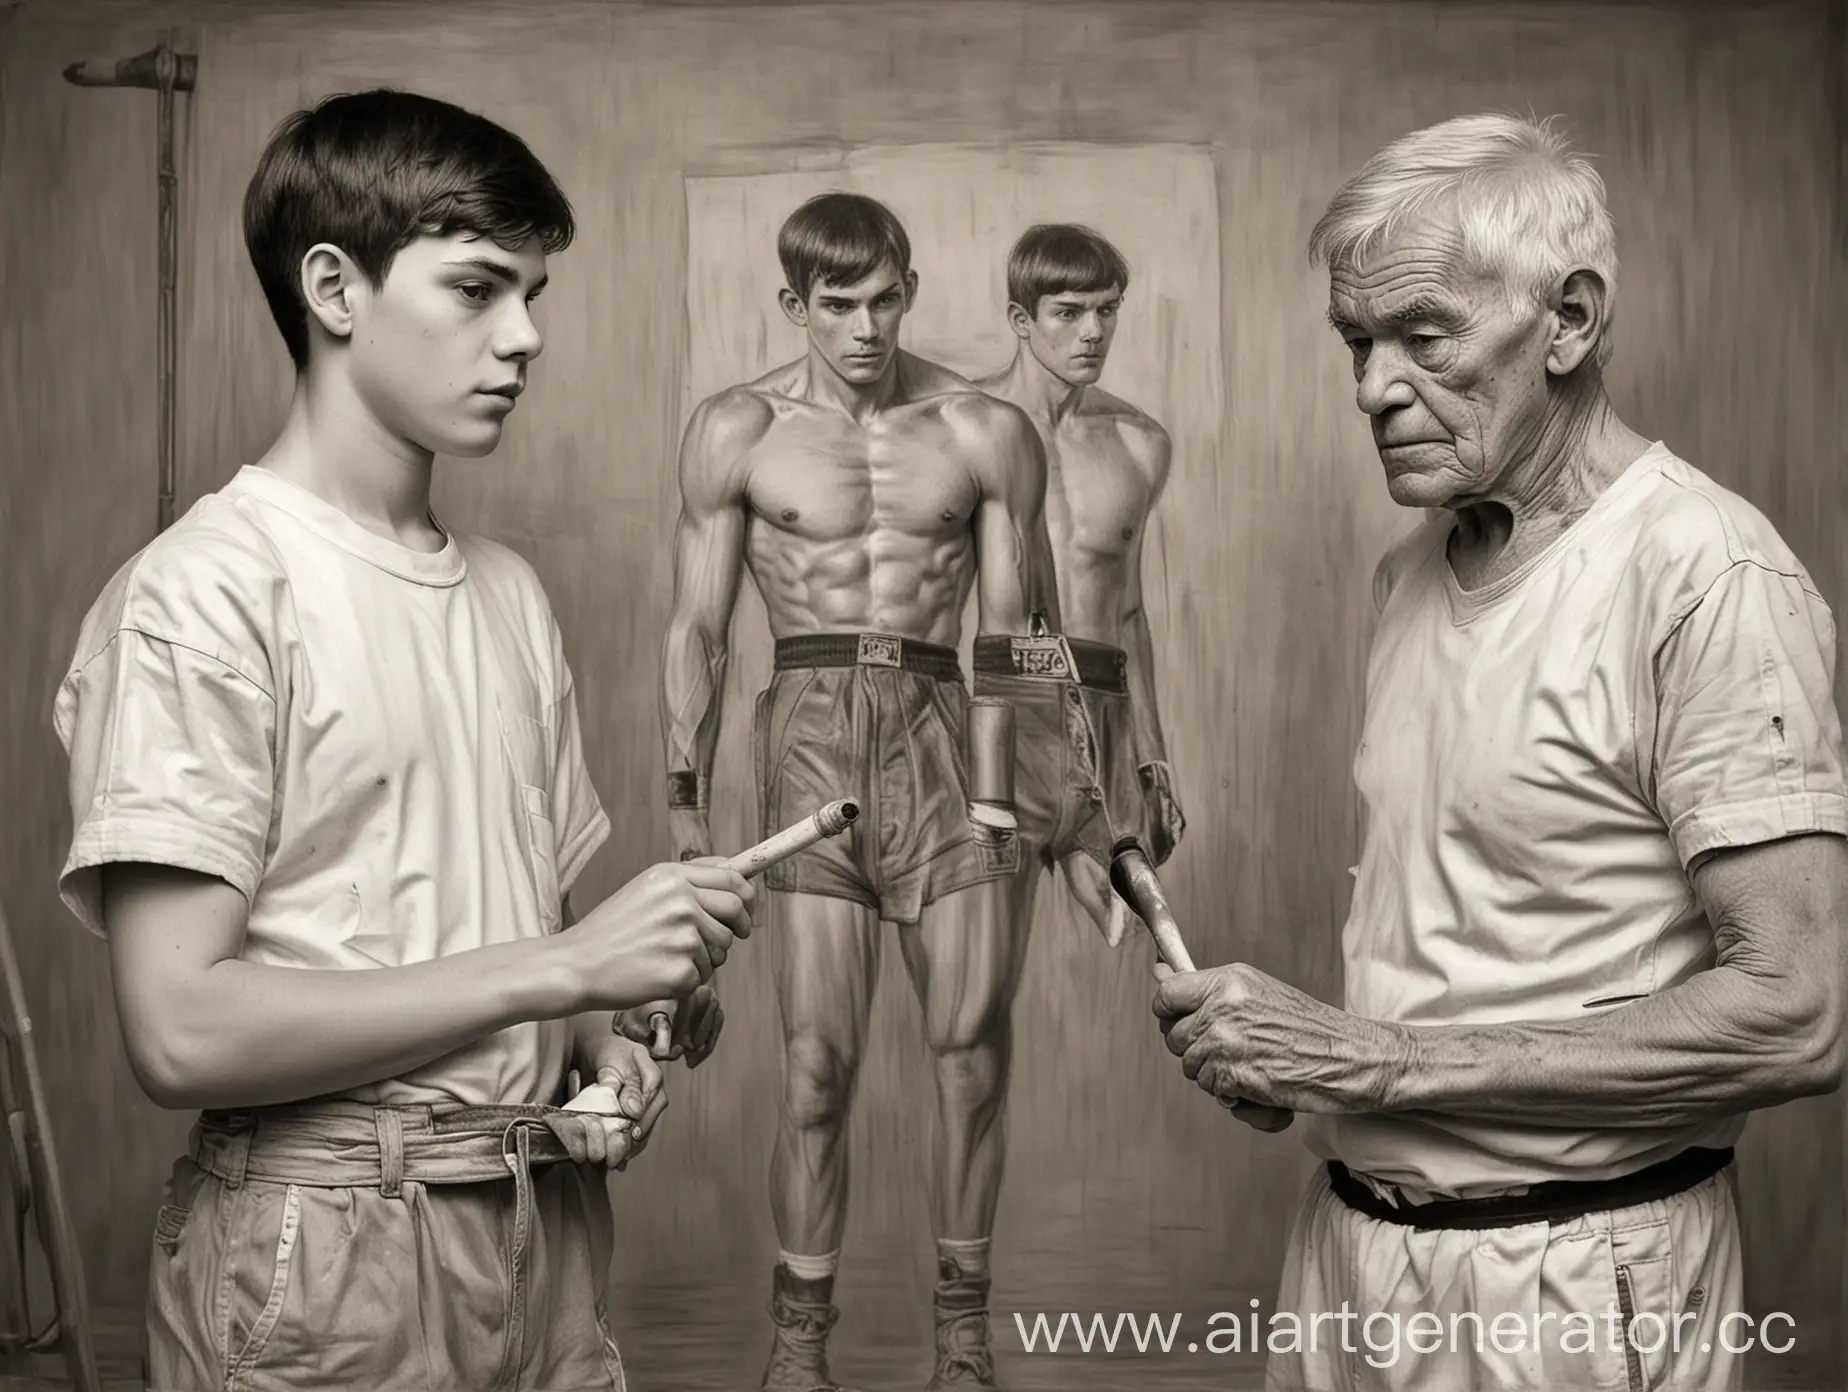 Intergenerational-Art-Encounter-Painter-Boy-and-Former-Boxer-in-Monochrome-Sketch